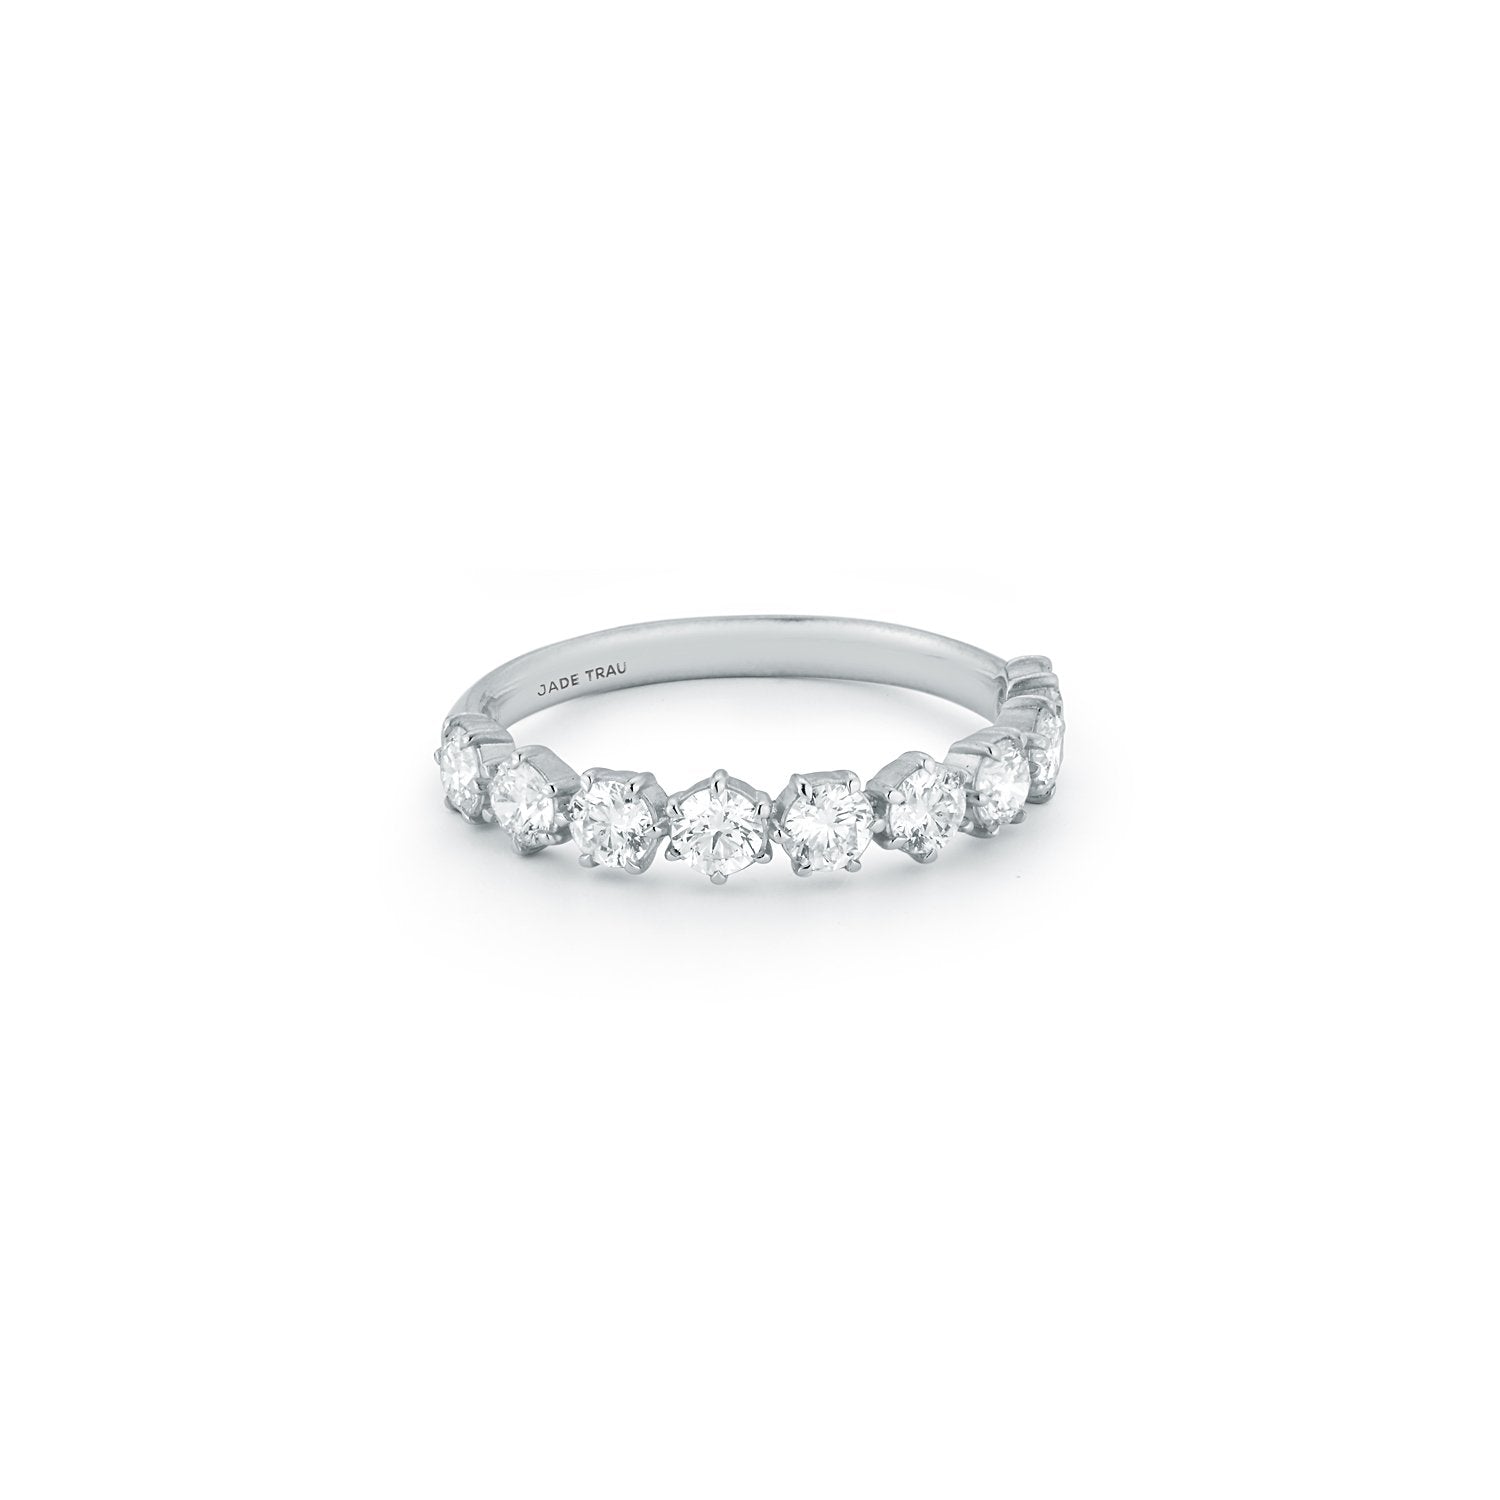 Catherine 1/2 Way Eternity No. 2 in 18K White Gold